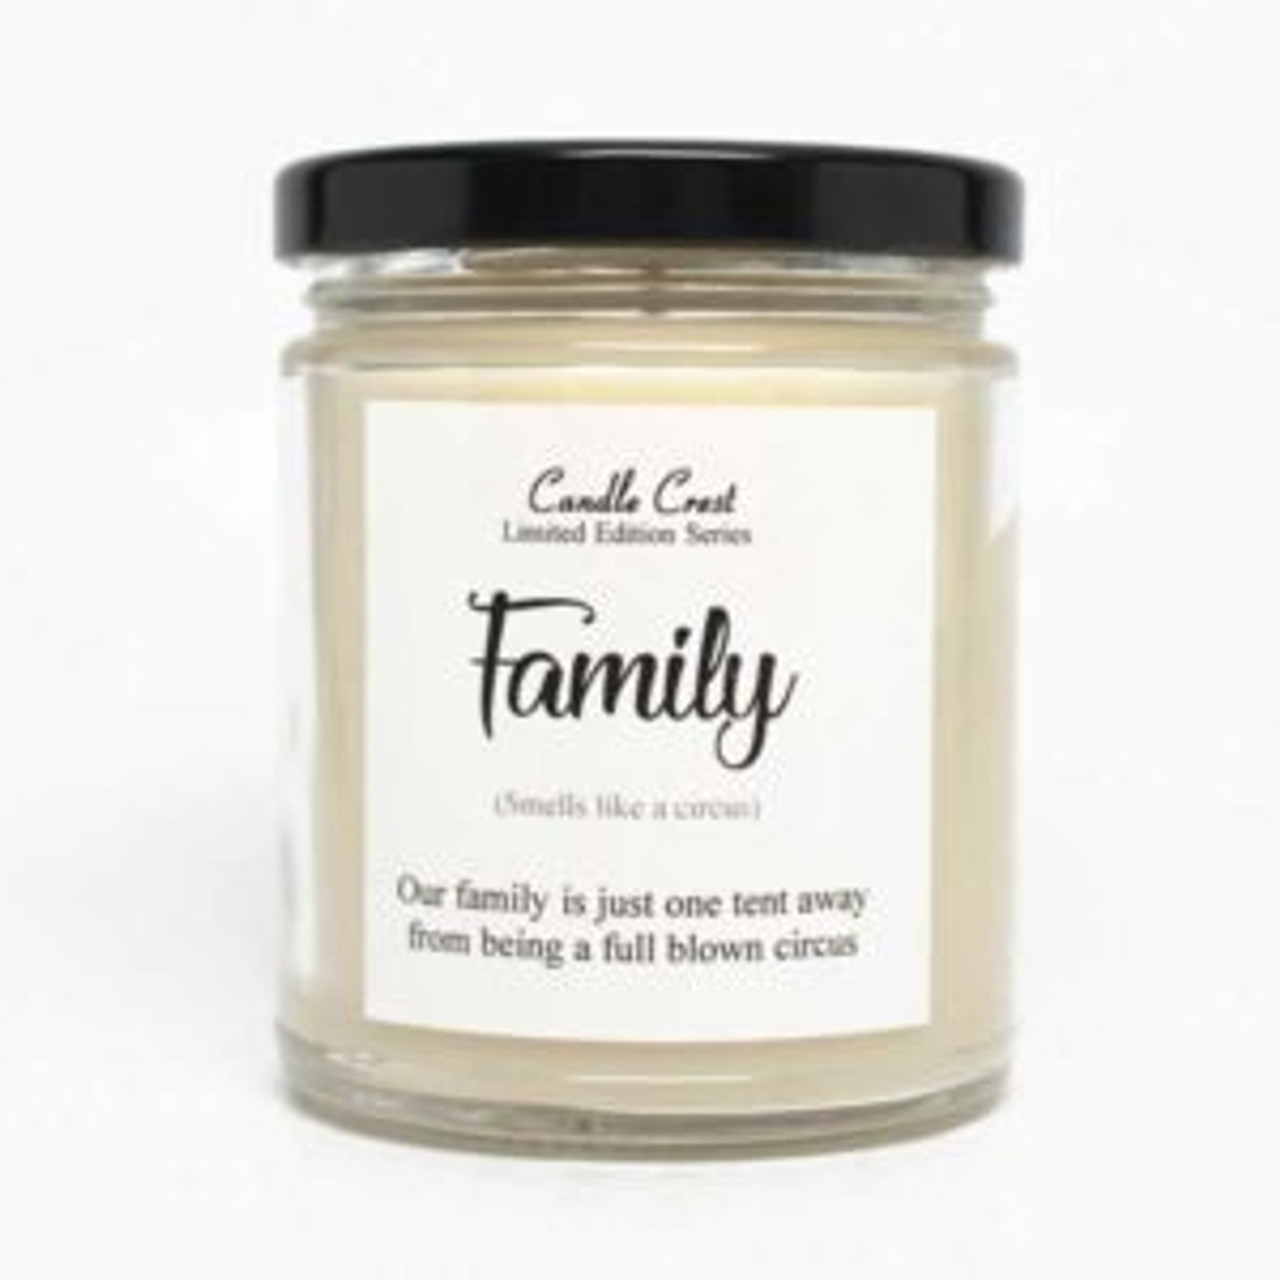 Best Friends Soy Candles  Candle Crest Soy Candles Inc